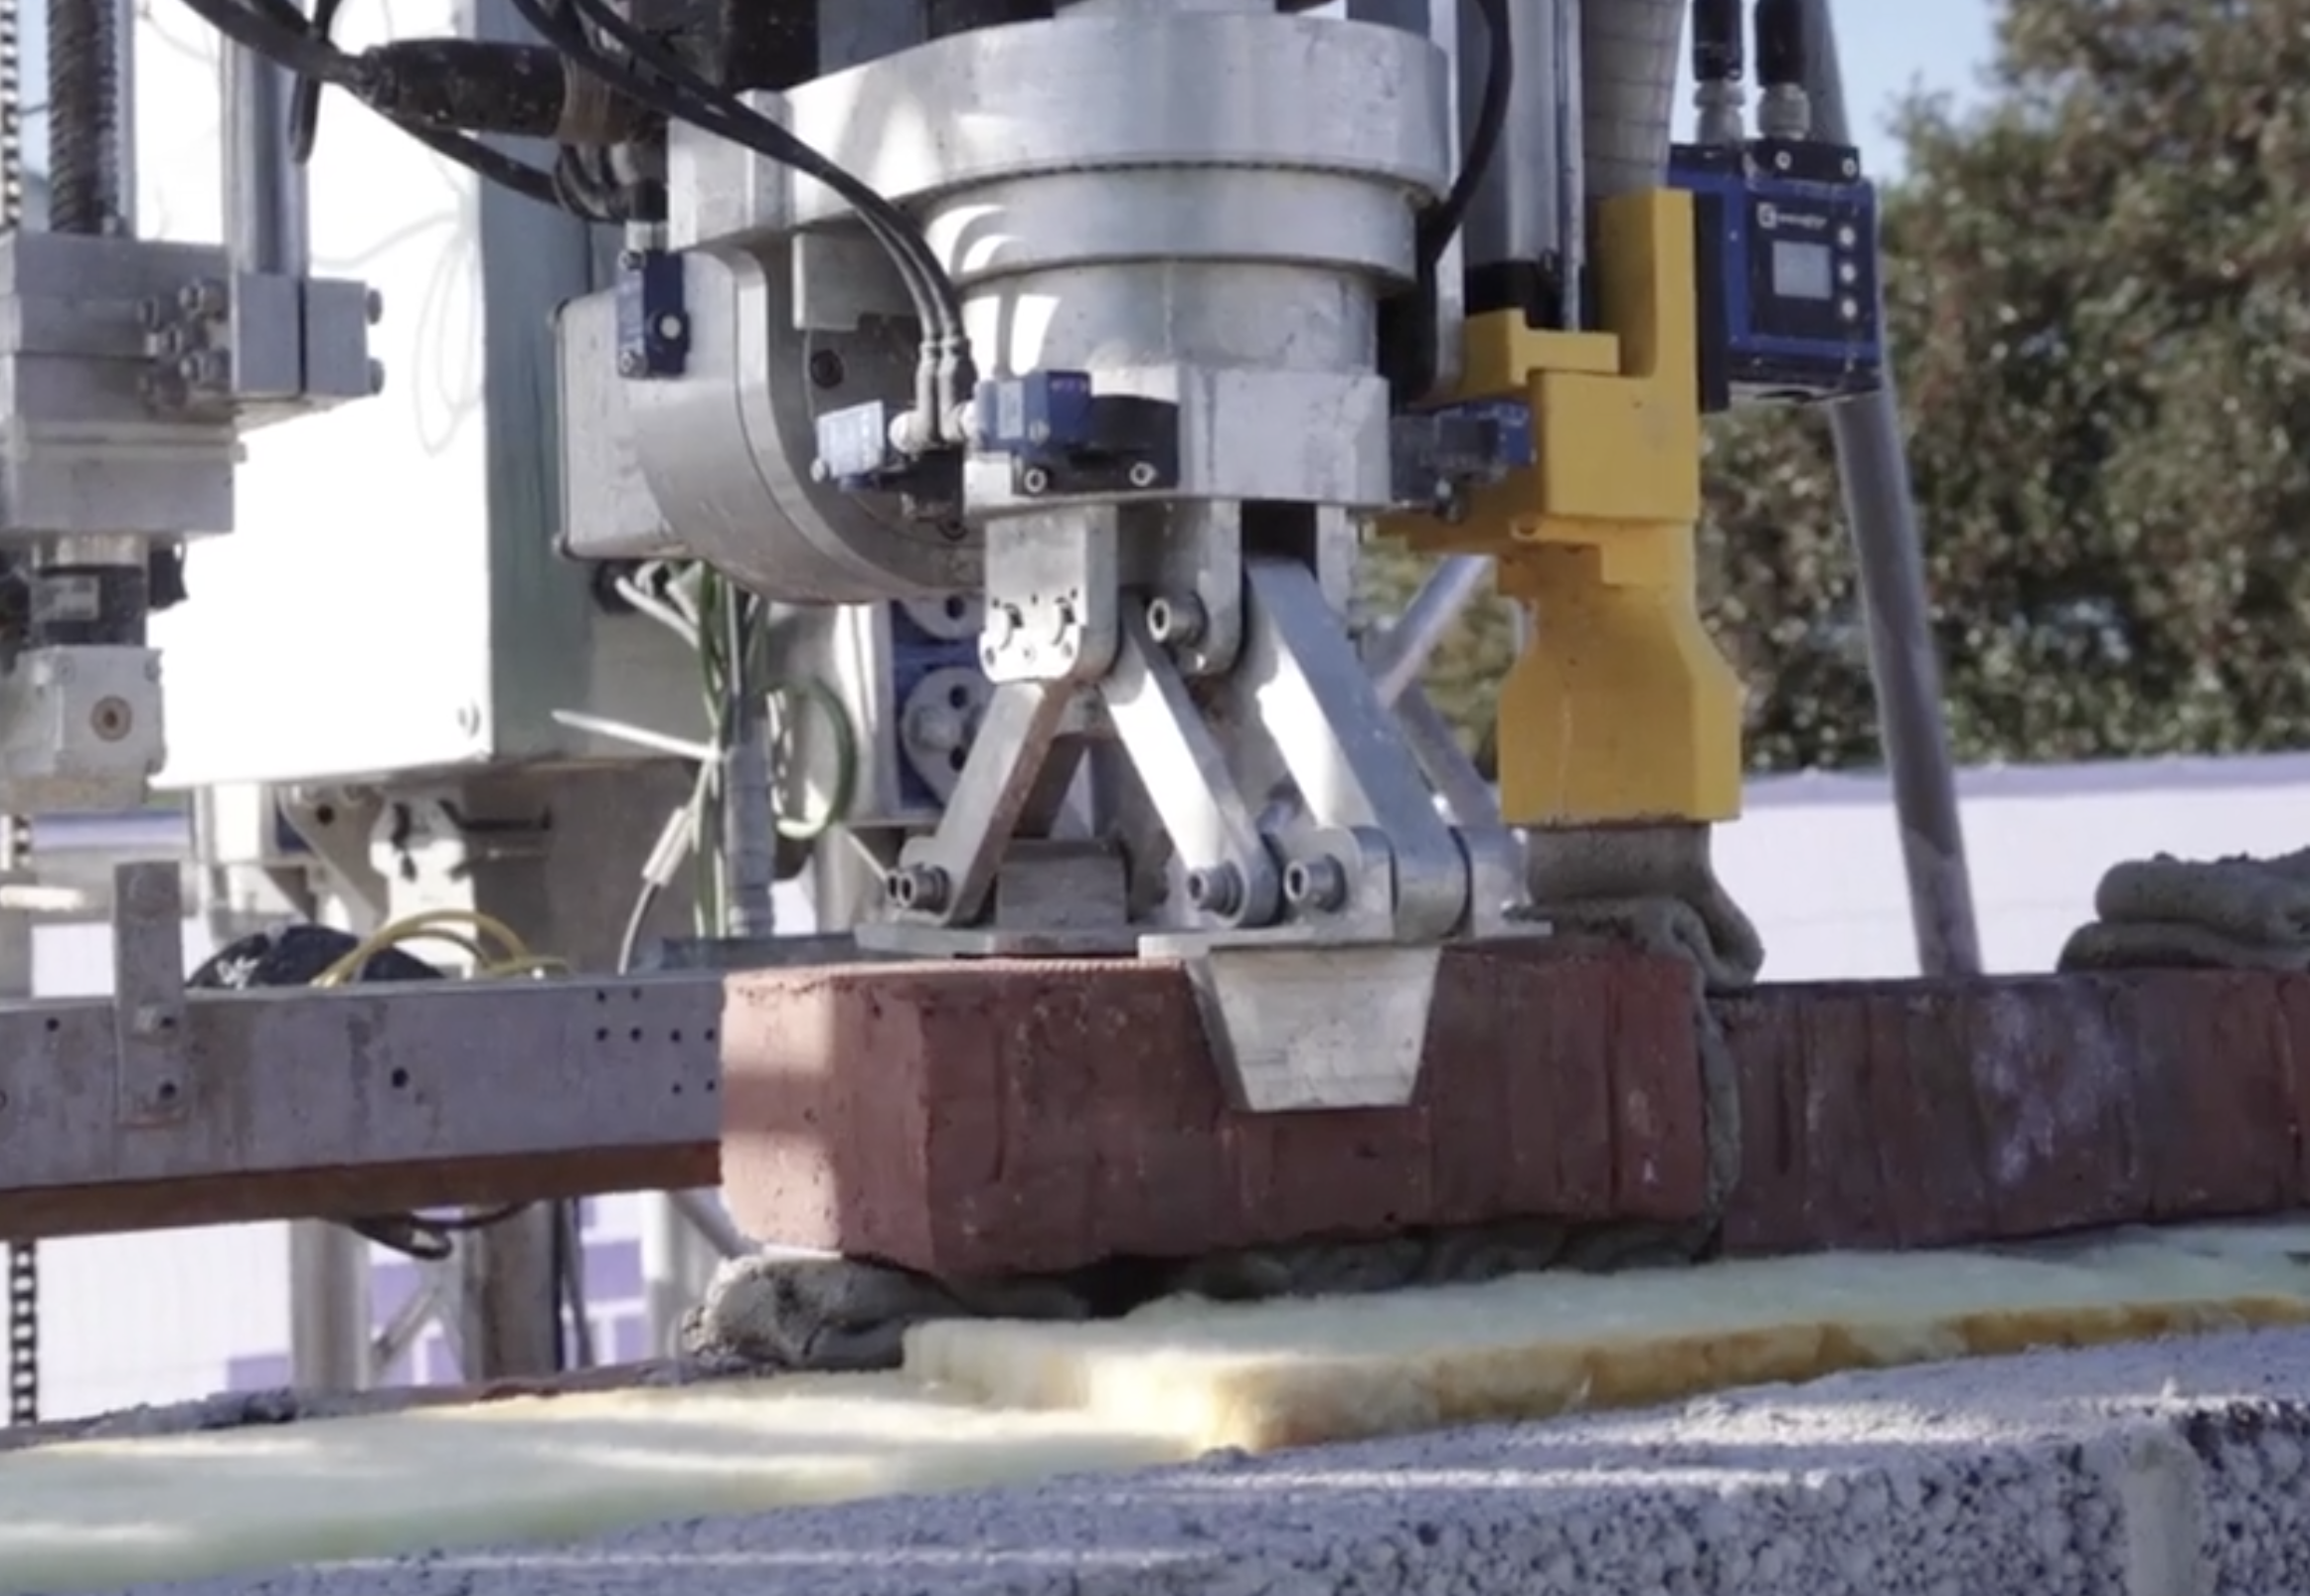 Bricklaying robot to change construction forever